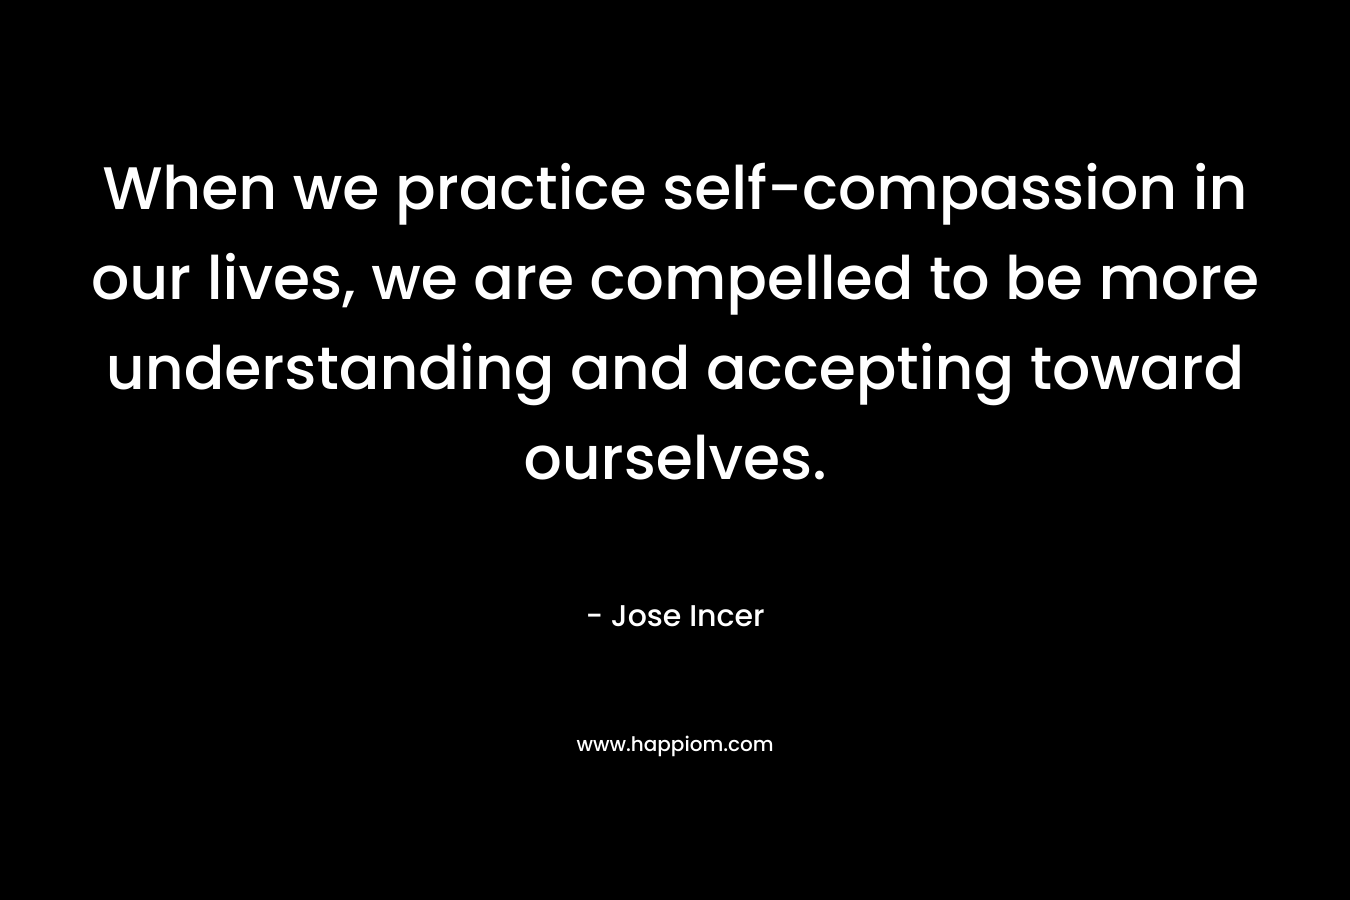 When we practice self-compassion in our lives, we are compelled to be more understanding and accepting toward ourselves. – Jose Incer